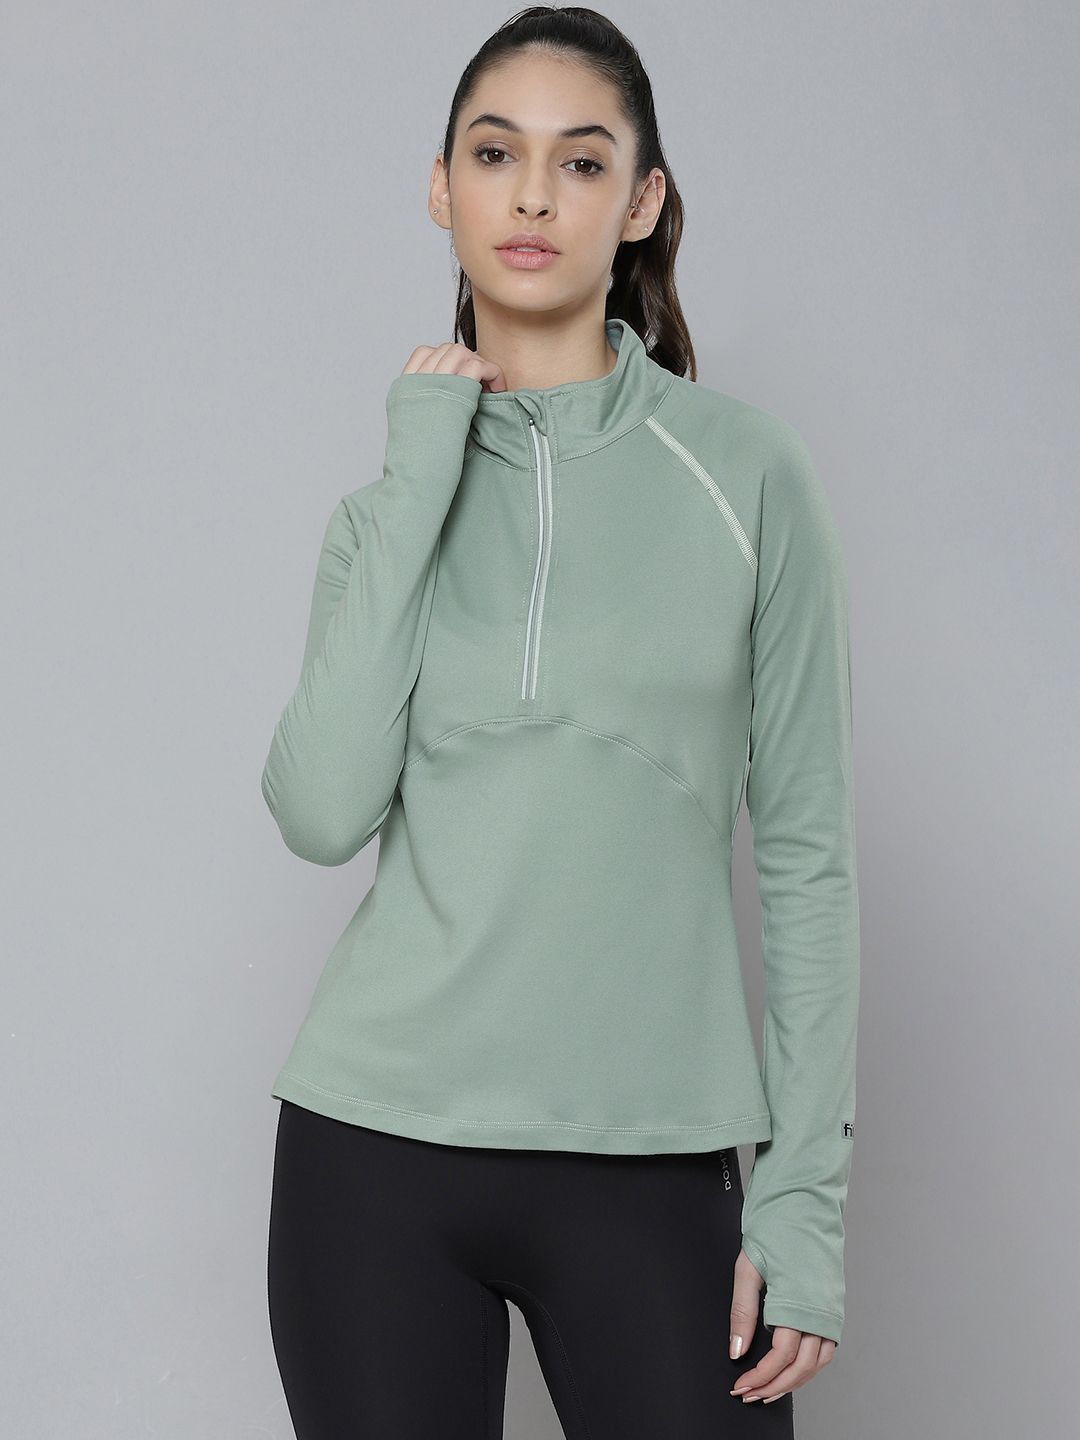 Fitkin Women Green High Neck Training or Gym T-shirt Price in India